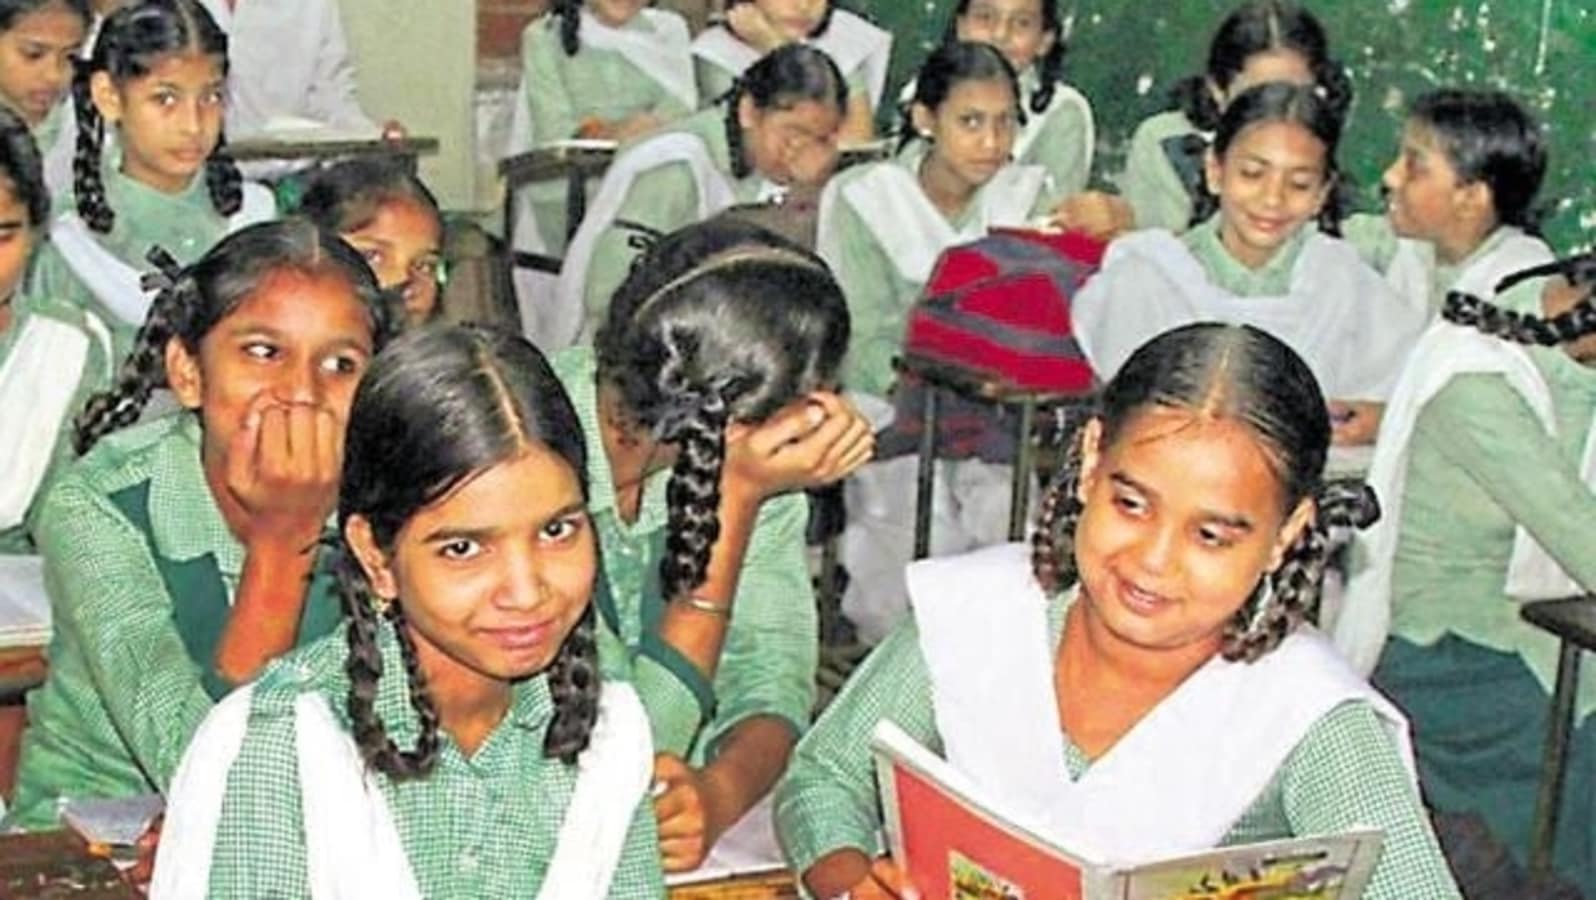 Schools to reopen in UP for classes 9-12 from Aug 16 with 50 pc attendance